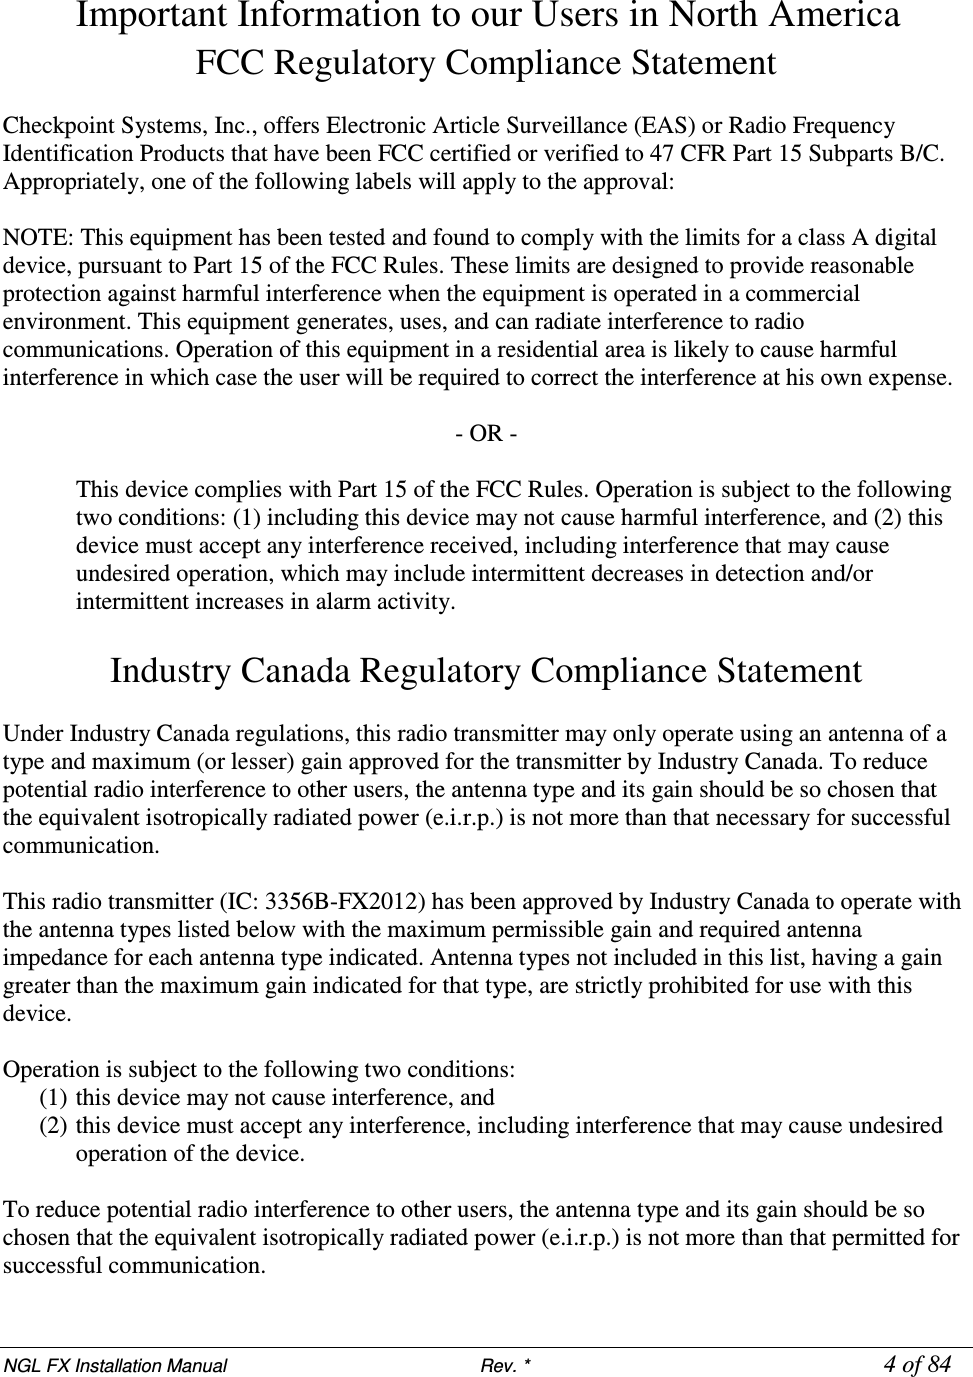 NGL FX Installation Manual                           Rev. *            4 of 84 Important Information to our Users in North America FCC Regulatory Compliance Statement  Checkpoint Systems, Inc., offers Electronic Article Surveillance (EAS) or Radio Frequency Identification Products that have been FCC certified or verified to 47 CFR Part 15 Subparts B/C. Appropriately, one of the following labels will apply to the approval:  NOTE: This equipment has been tested and found to comply with the limits for a class A digital device, pursuant to Part 15 of the FCC Rules. These limits are designed to provide reasonable protection against harmful interference when the equipment is operated in a commercial environment. This equipment generates, uses, and can radiate interference to radio communications. Operation of this equipment in a residential area is likely to cause harmful interference in which case the user will be required to correct the interference at his own expense.  - OR -  This device complies with Part 15 of the FCC Rules. Operation is subject to the following two conditions: (1) including this device may not cause harmful interference, and (2) this device must accept any interference received, including interference that may cause undesired operation, which may include intermittent decreases in detection and/or intermittent increases in alarm activity.   Industry Canada Regulatory Compliance Statement  Under Industry Canada regulations, this radio transmitter may only operate using an antenna of a type and maximum (or lesser) gain approved for the transmitter by Industry Canada. To reduce potential radio interference to other users, the antenna type and its gain should be so chosen that the equivalent isotropically radiated power (e.i.r.p.) is not more than that necessary for successful communication.  This radio transmitter (IC: 3356B-FX2012) has been approved by Industry Canada to operate with the antenna types listed below with the maximum permissible gain and required antenna impedance for each antenna type indicated. Antenna types not included in this list, having a gain greater than the maximum gain indicated for that type, are strictly prohibited for use with this device.  Operation is subject to the following two conditions:  (1) this device may not cause interference, and  (2) this device must accept any interference, including interference that may cause undesired operation of the device.  To reduce potential radio interference to other users, the antenna type and its gain should be so chosen that the equivalent isotropically radiated power (e.i.r.p.) is not more than that permitted for successful communication. 